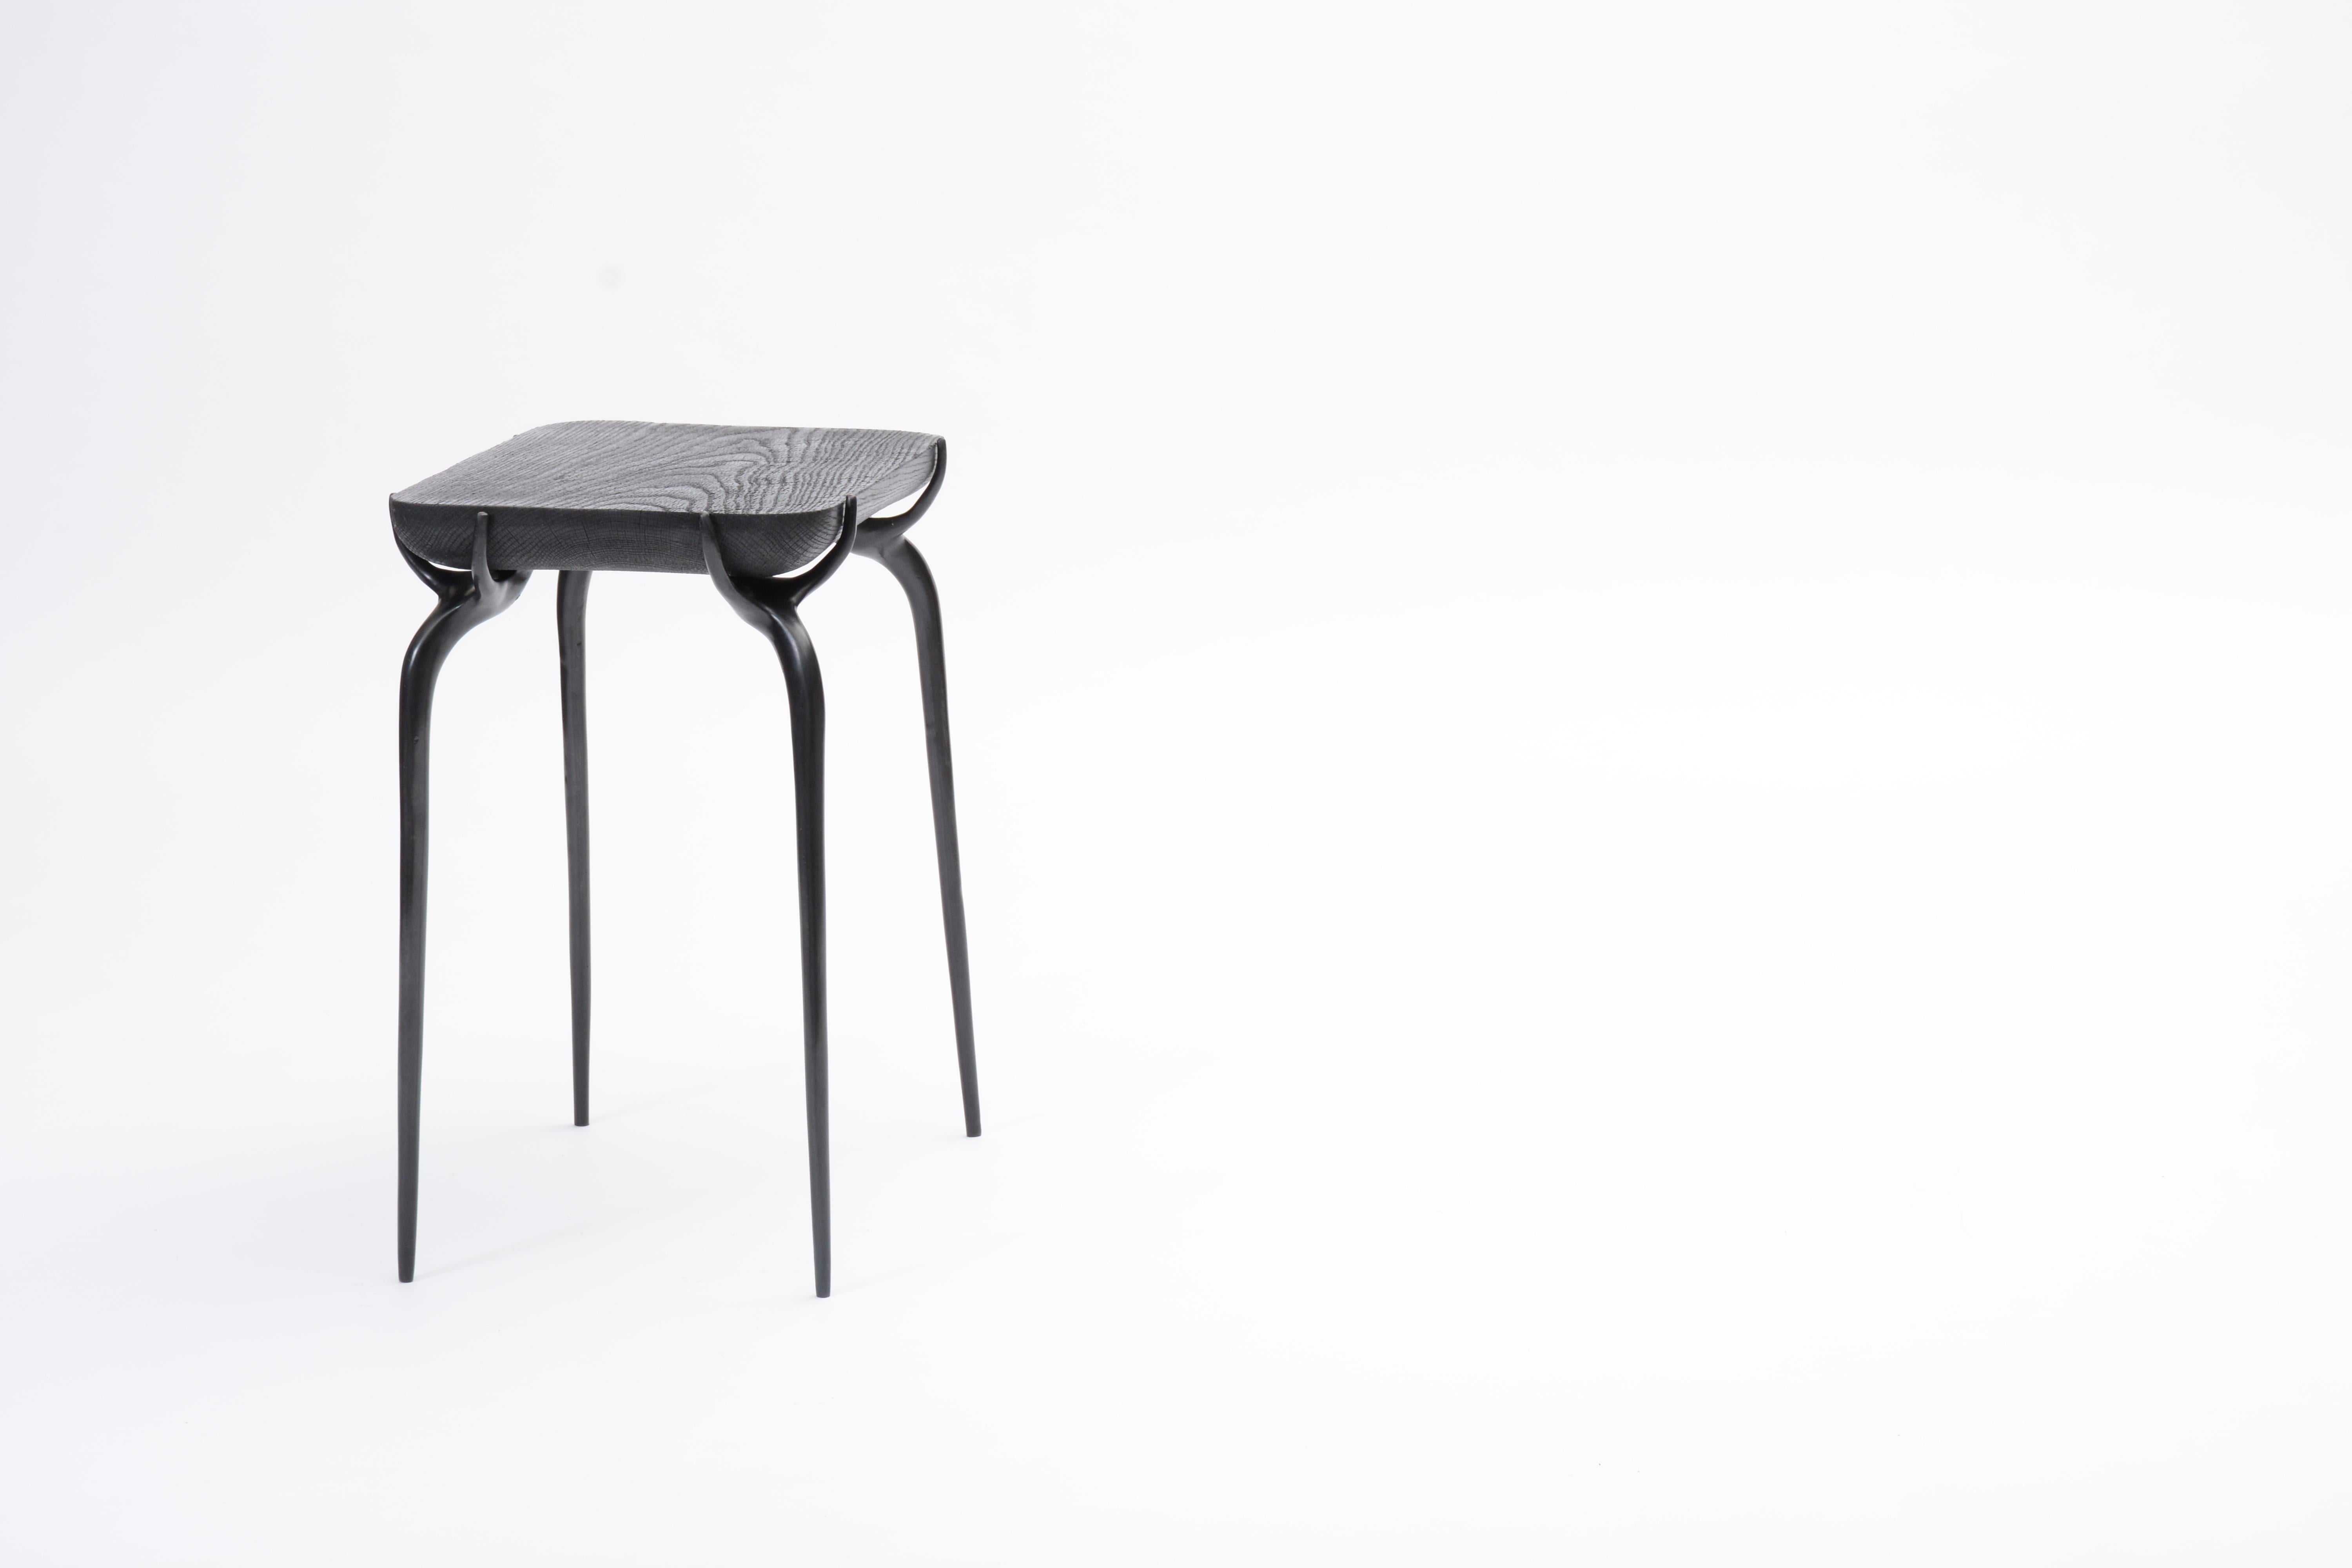 AVAILABLE NOW AND READY TO SHIP! 

A versatile Jewel Side Table with burnt black oak top, and cast bronze base with black finish by Elan Atelier

The jewel side table is inspired by a contemporary sculpture in mediums of wood, metal, and stone. The